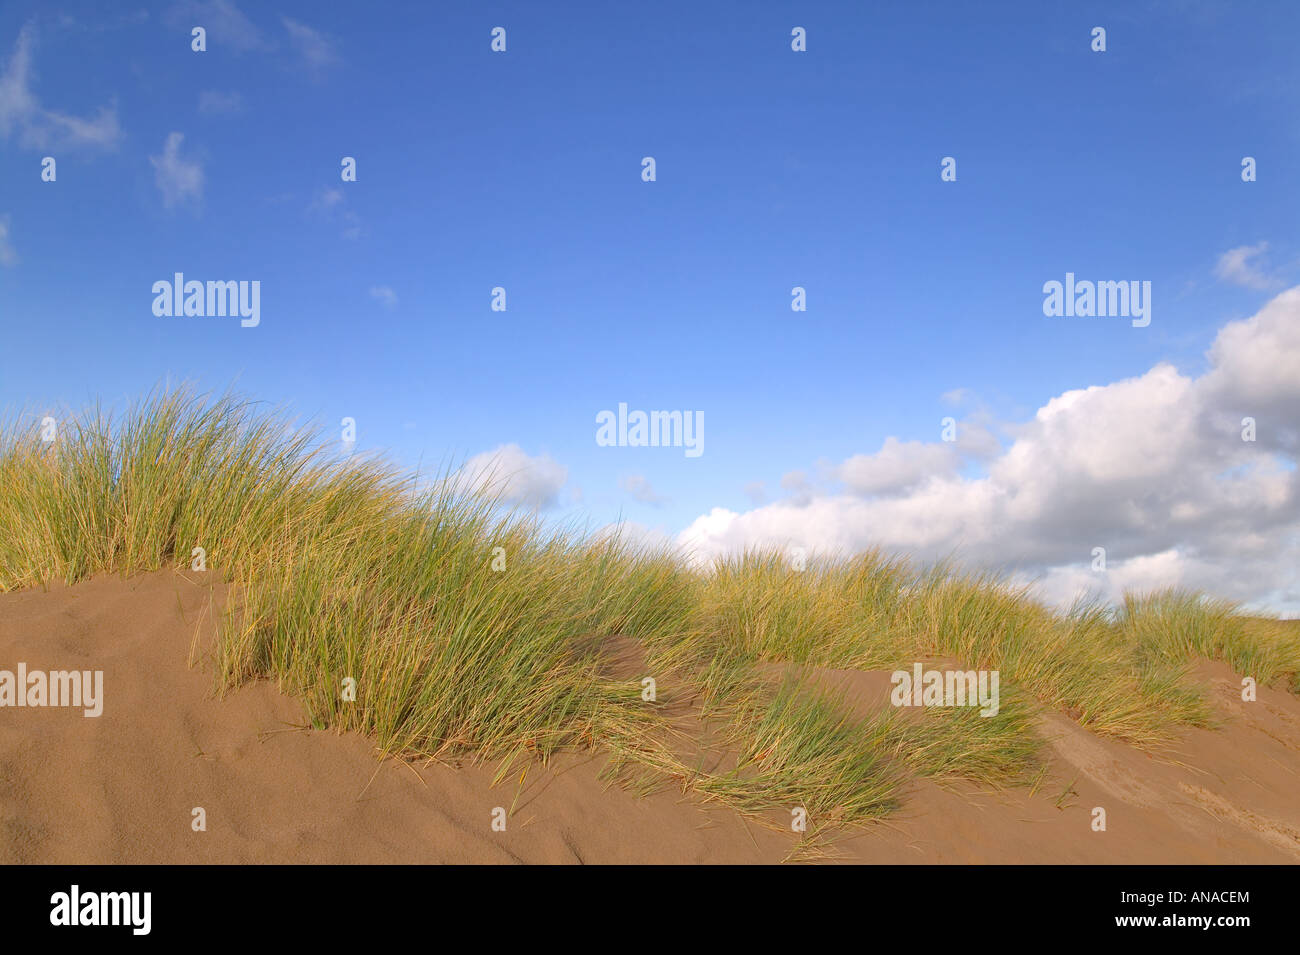 Sand dunes with wild seagrass against a blue cloudy sky Stock Photo